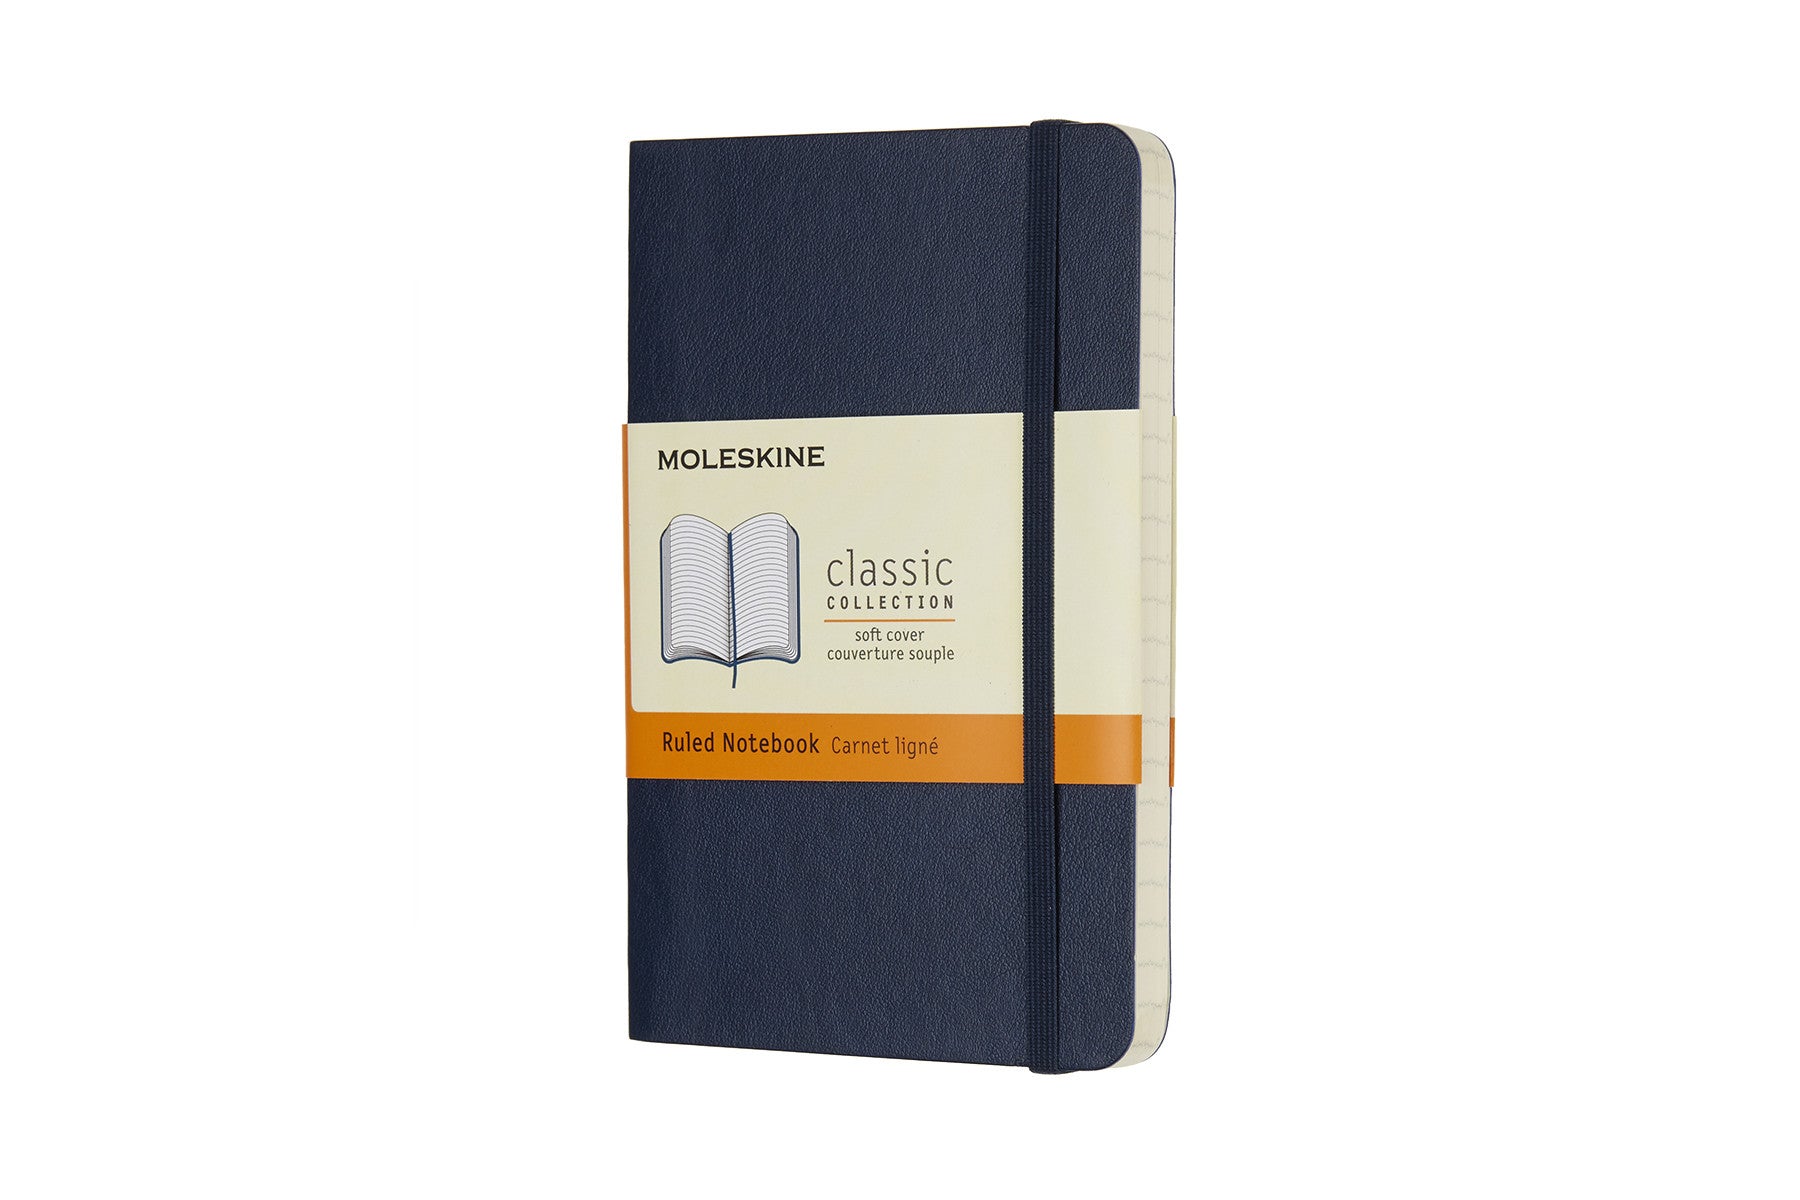 Moleskine notebook softcover pocket lined sapphire blue